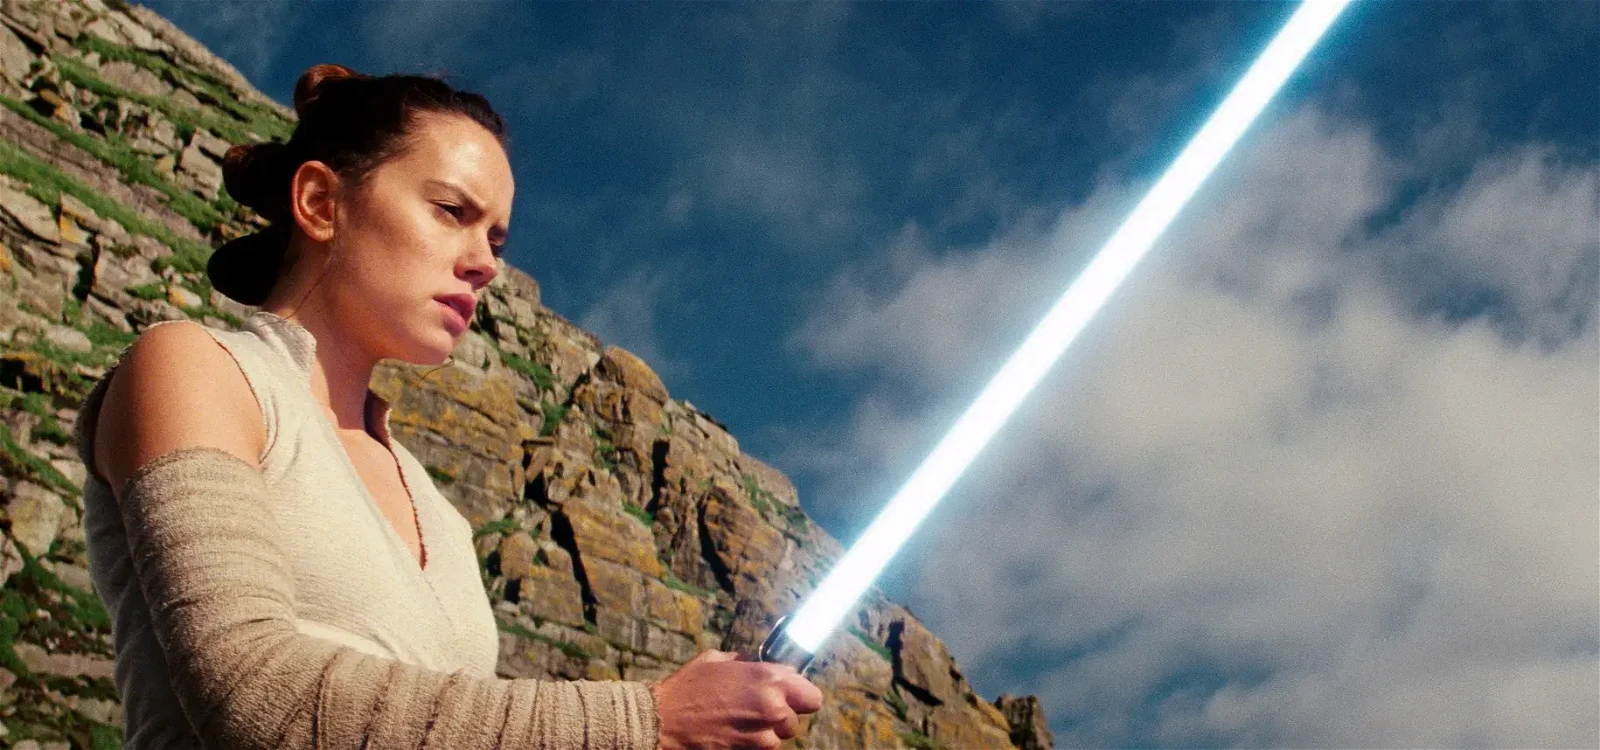 Disney is yet to clarify the blue lightsaber plot hole in Star Wars